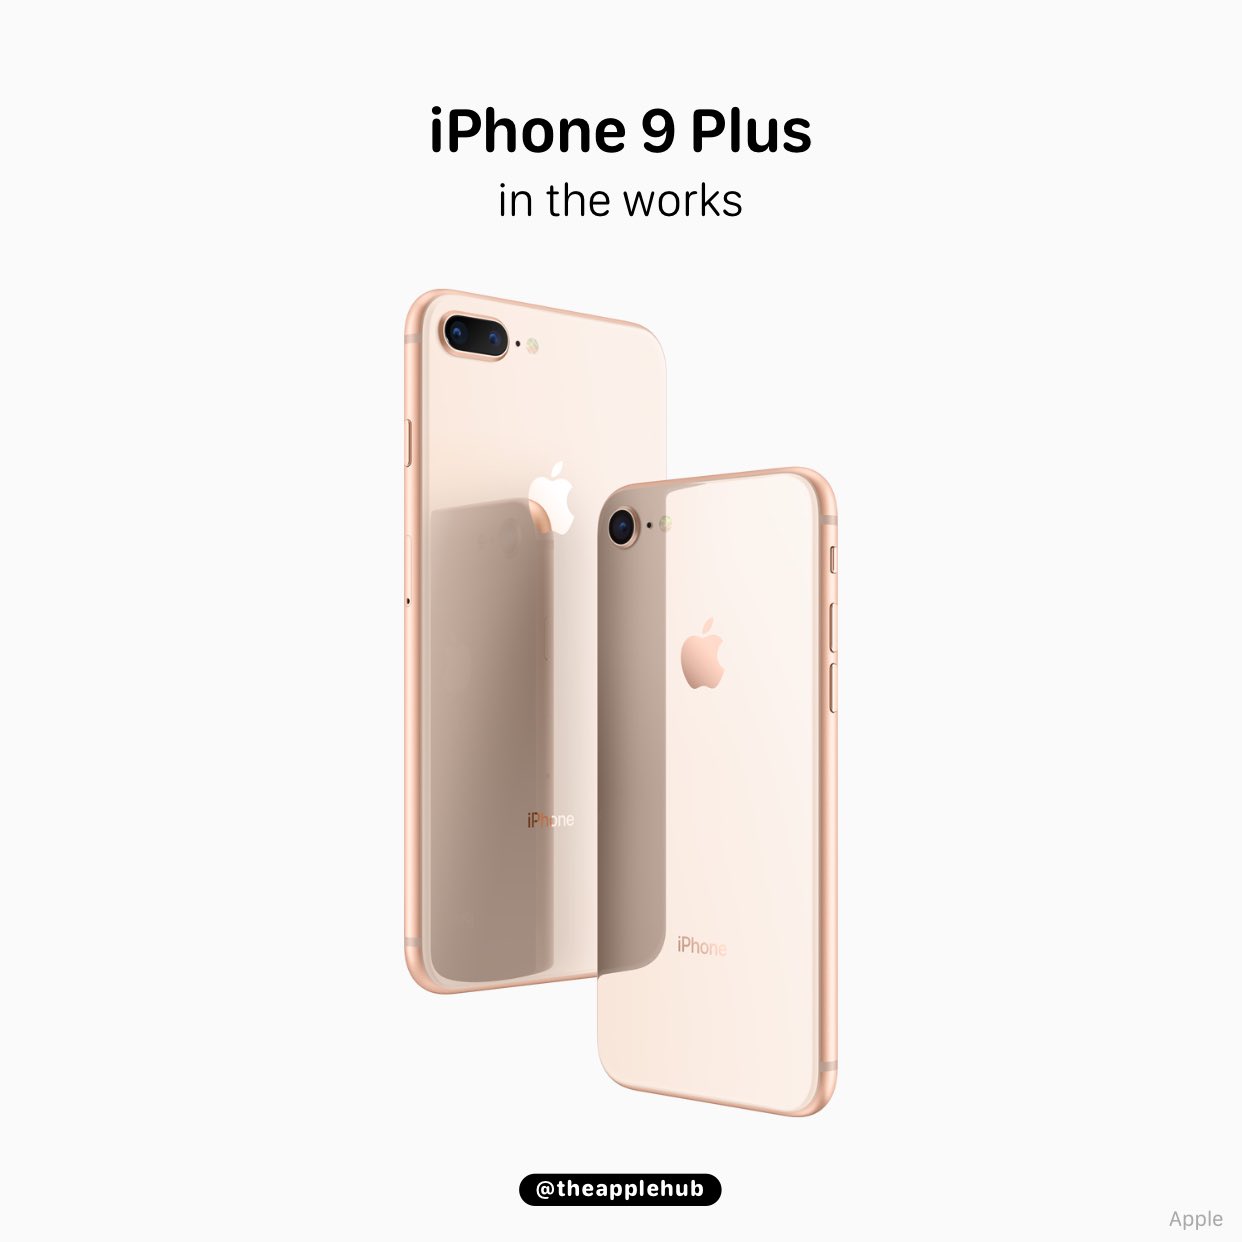 Apple iPhone 9 Plus in the works along with iPhone 9, iOS 14 code reveals